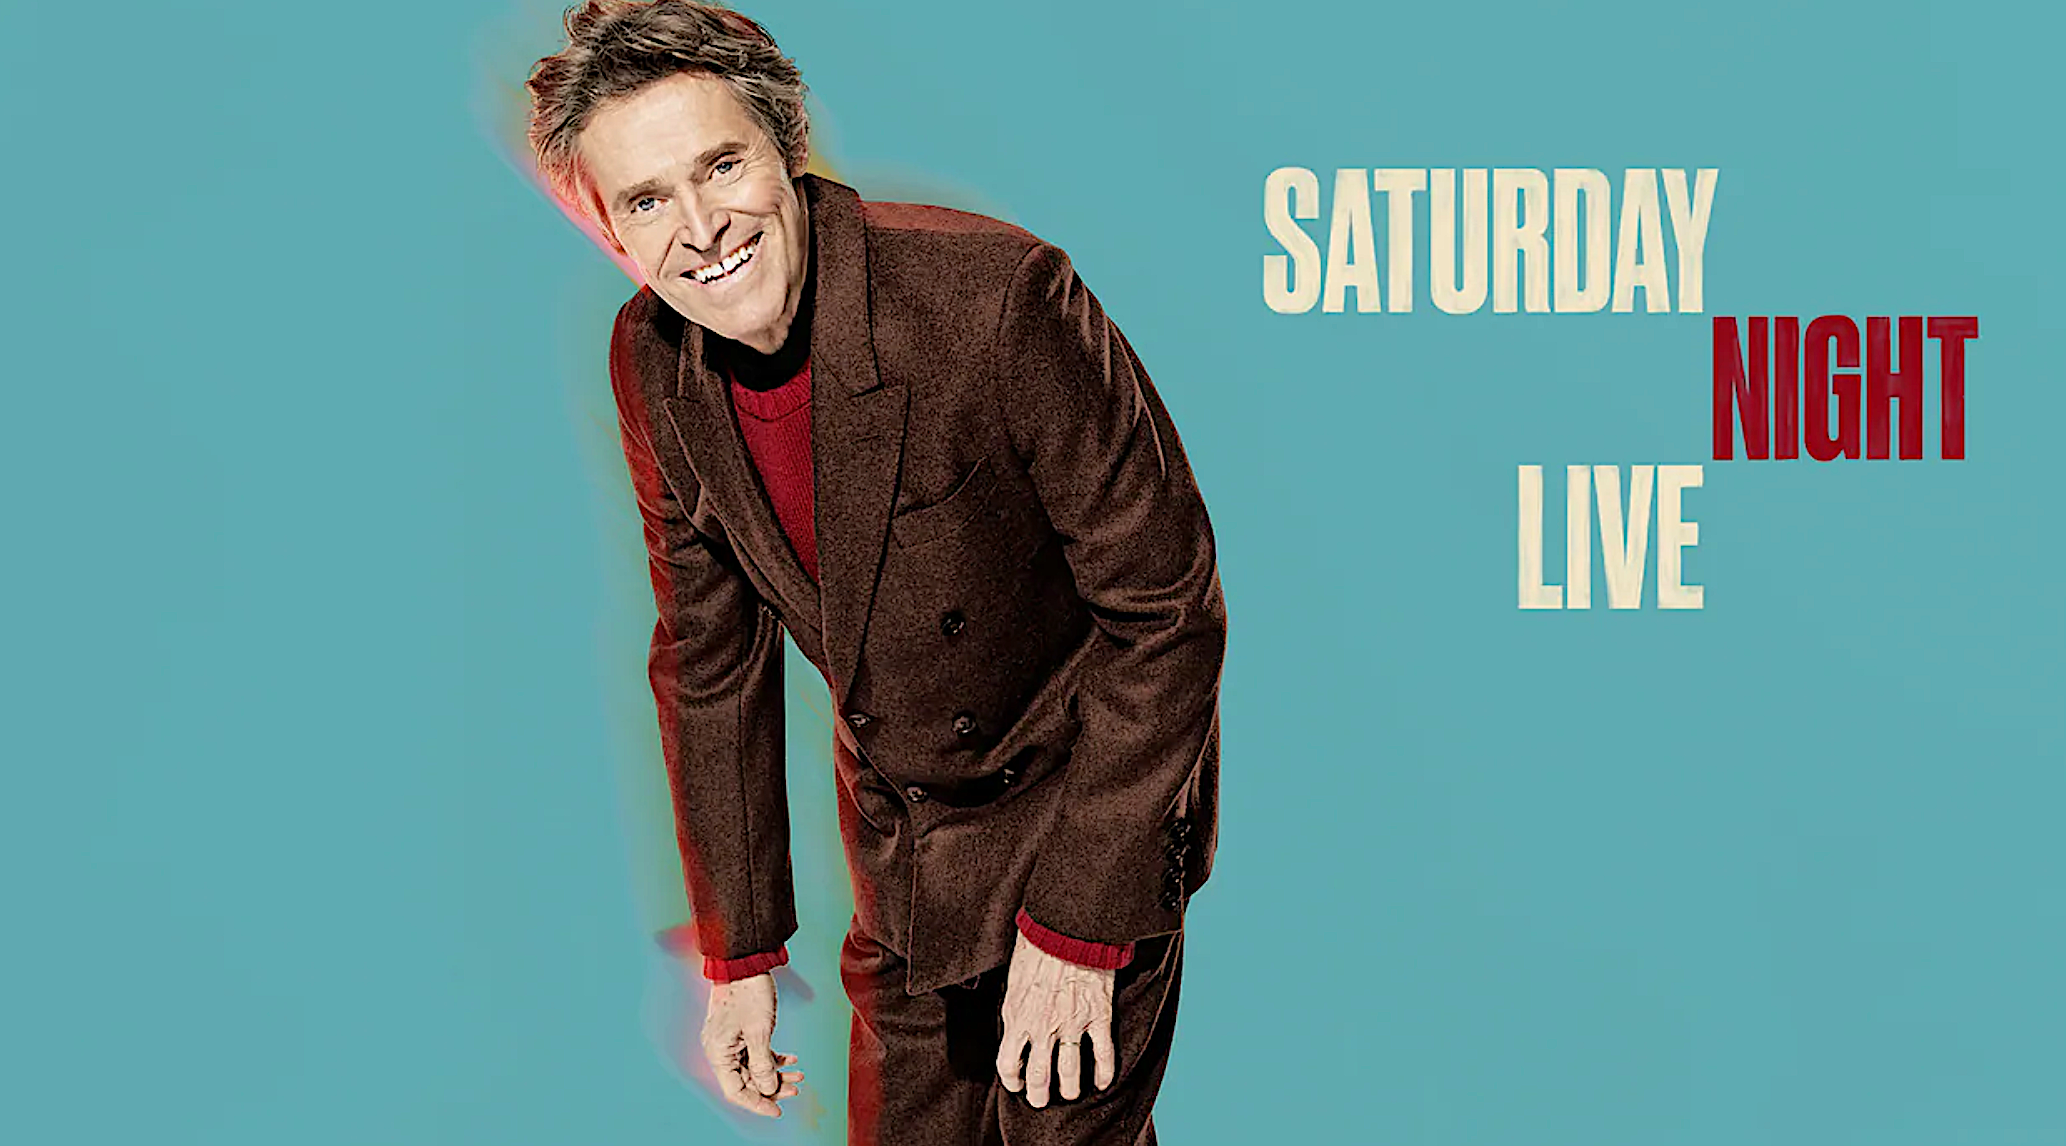 Willem Dafoe hosting Saturday Night Live is as weird as you’d expect, and as funny, unfortunately